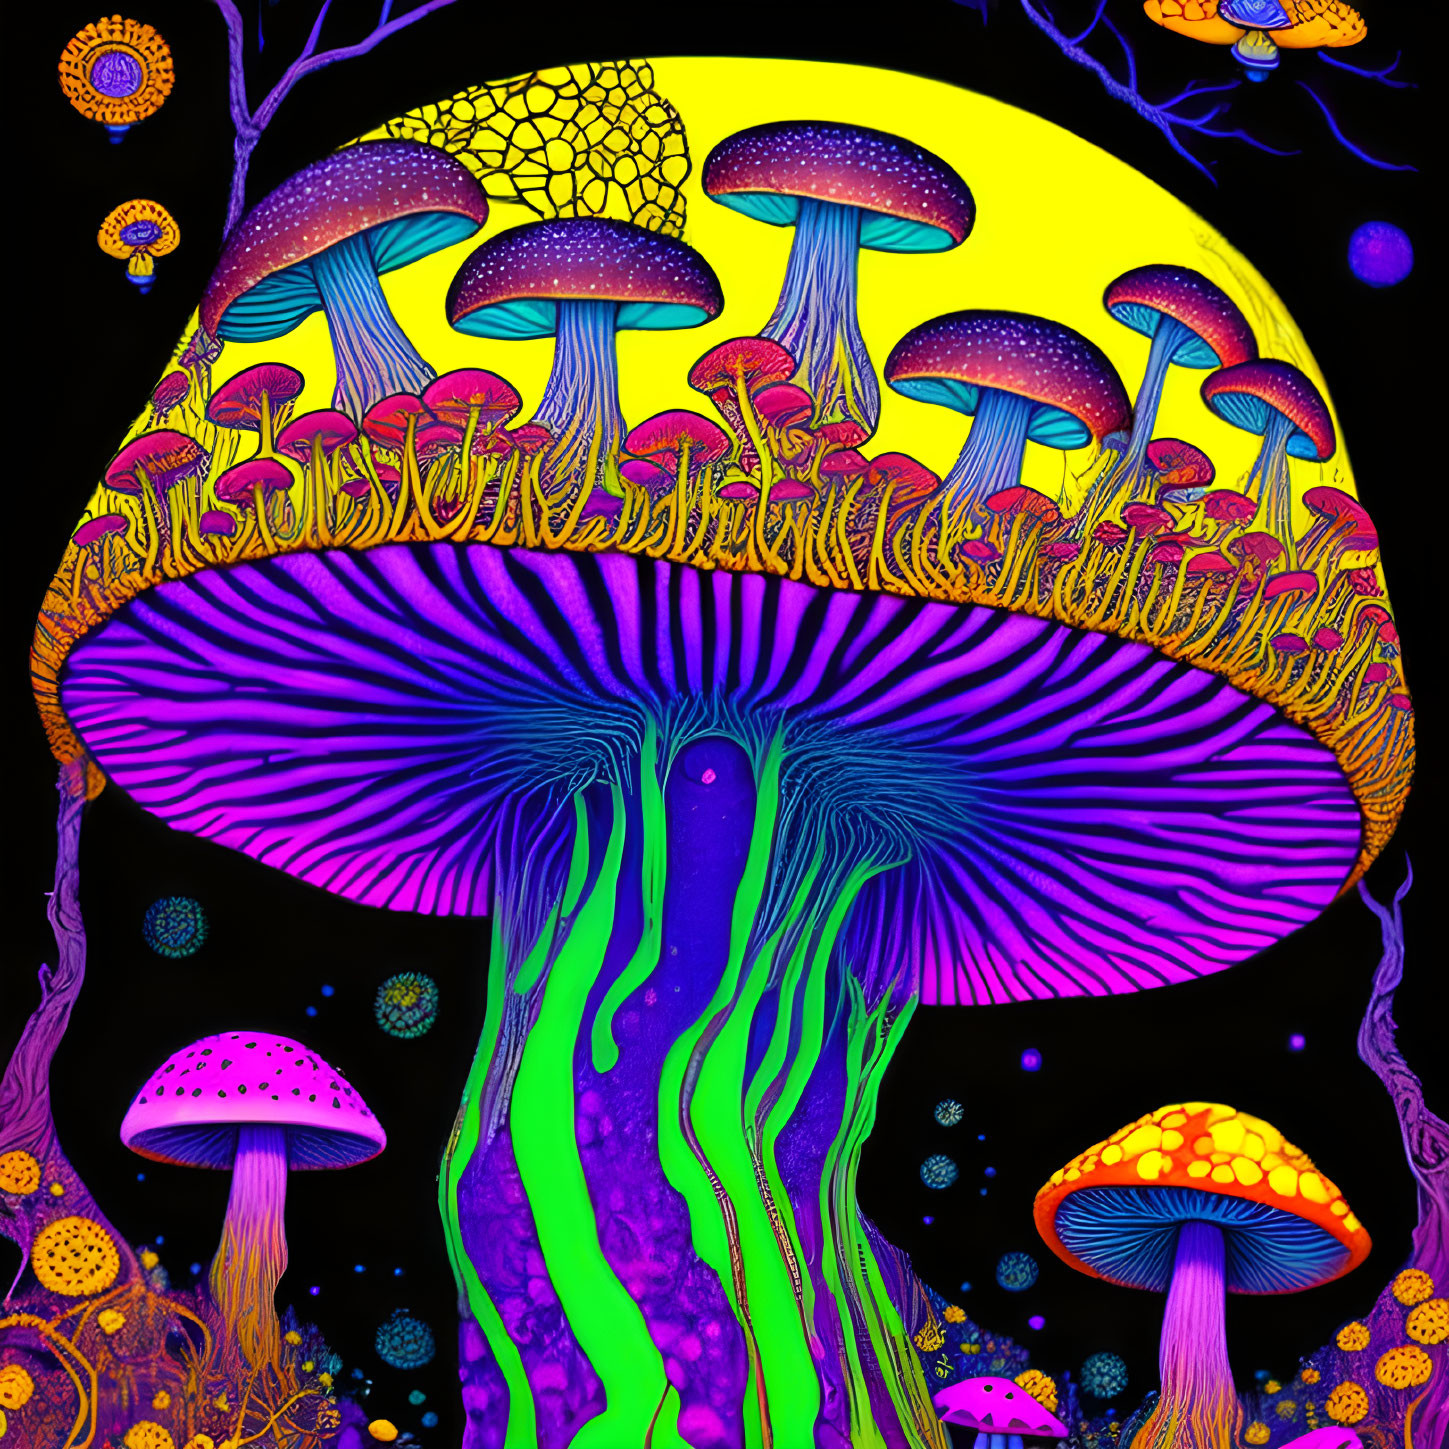 Shrooms thinking about Shrooms 